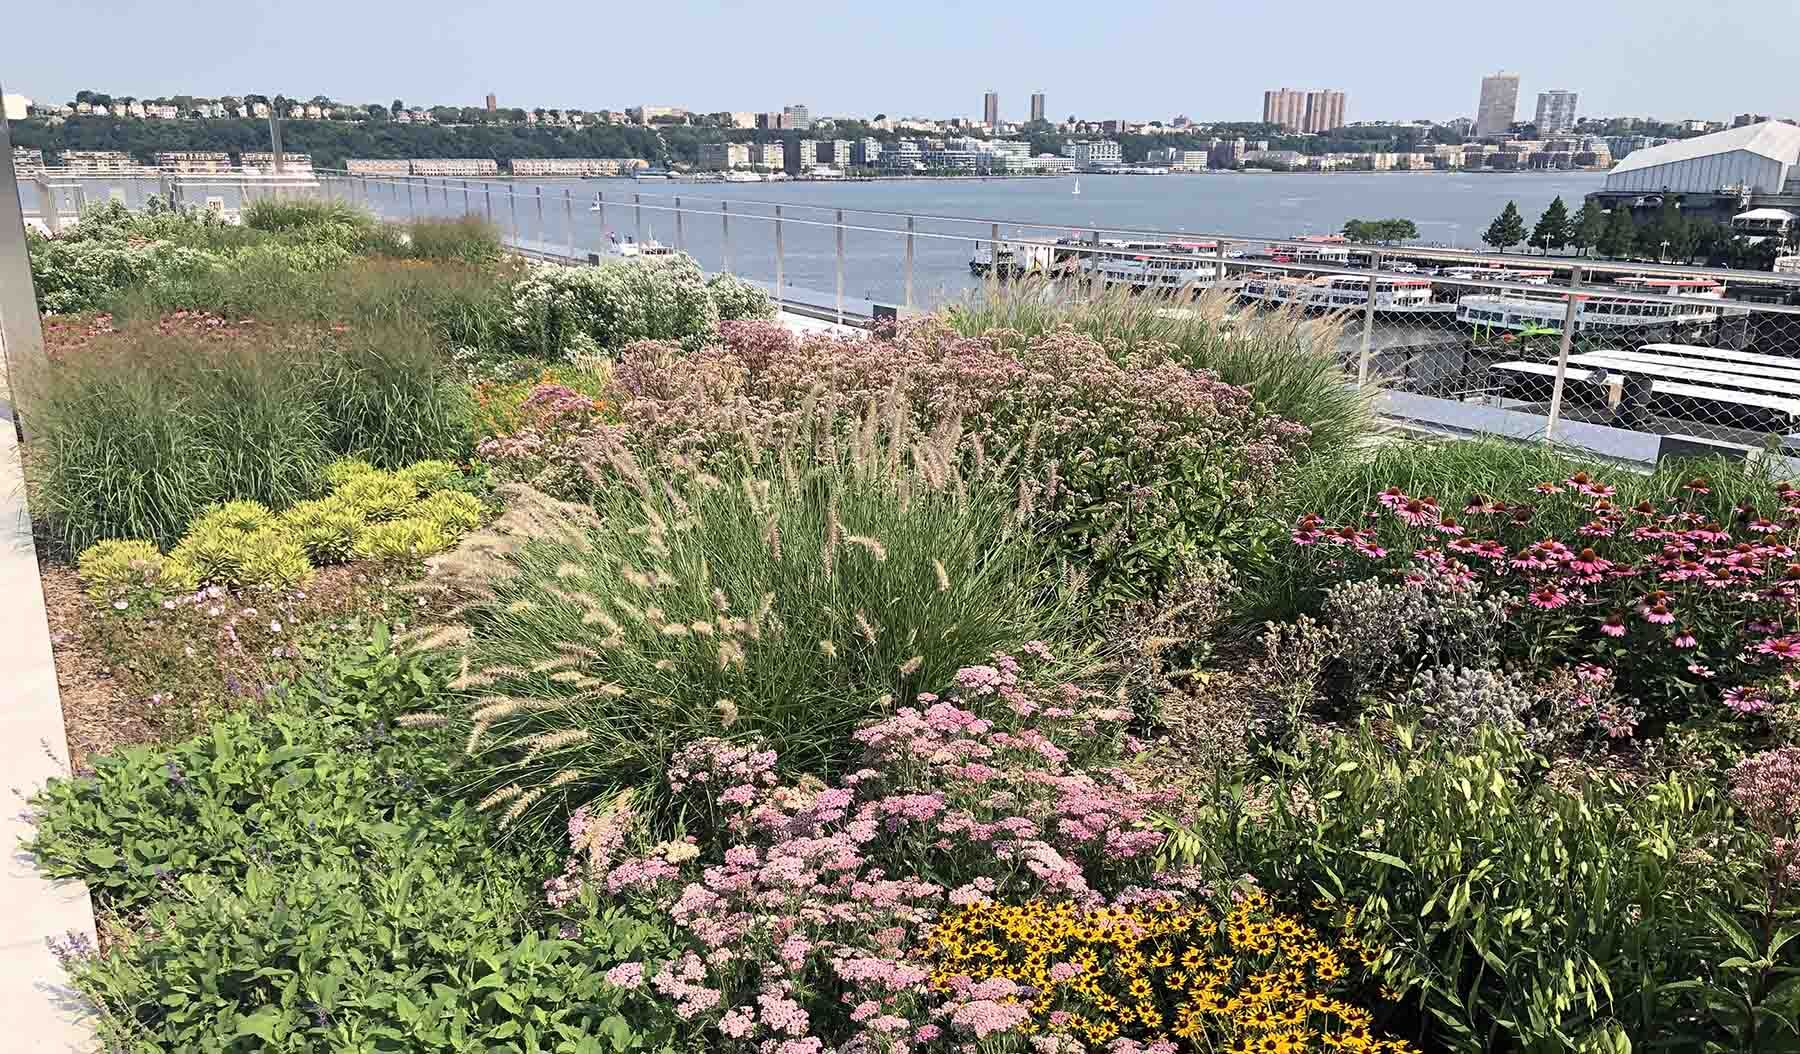 The pollinator garden atop the Javits Center absorbs rain water and provides stopover habitat for migrating birds. Photo: Javits Center